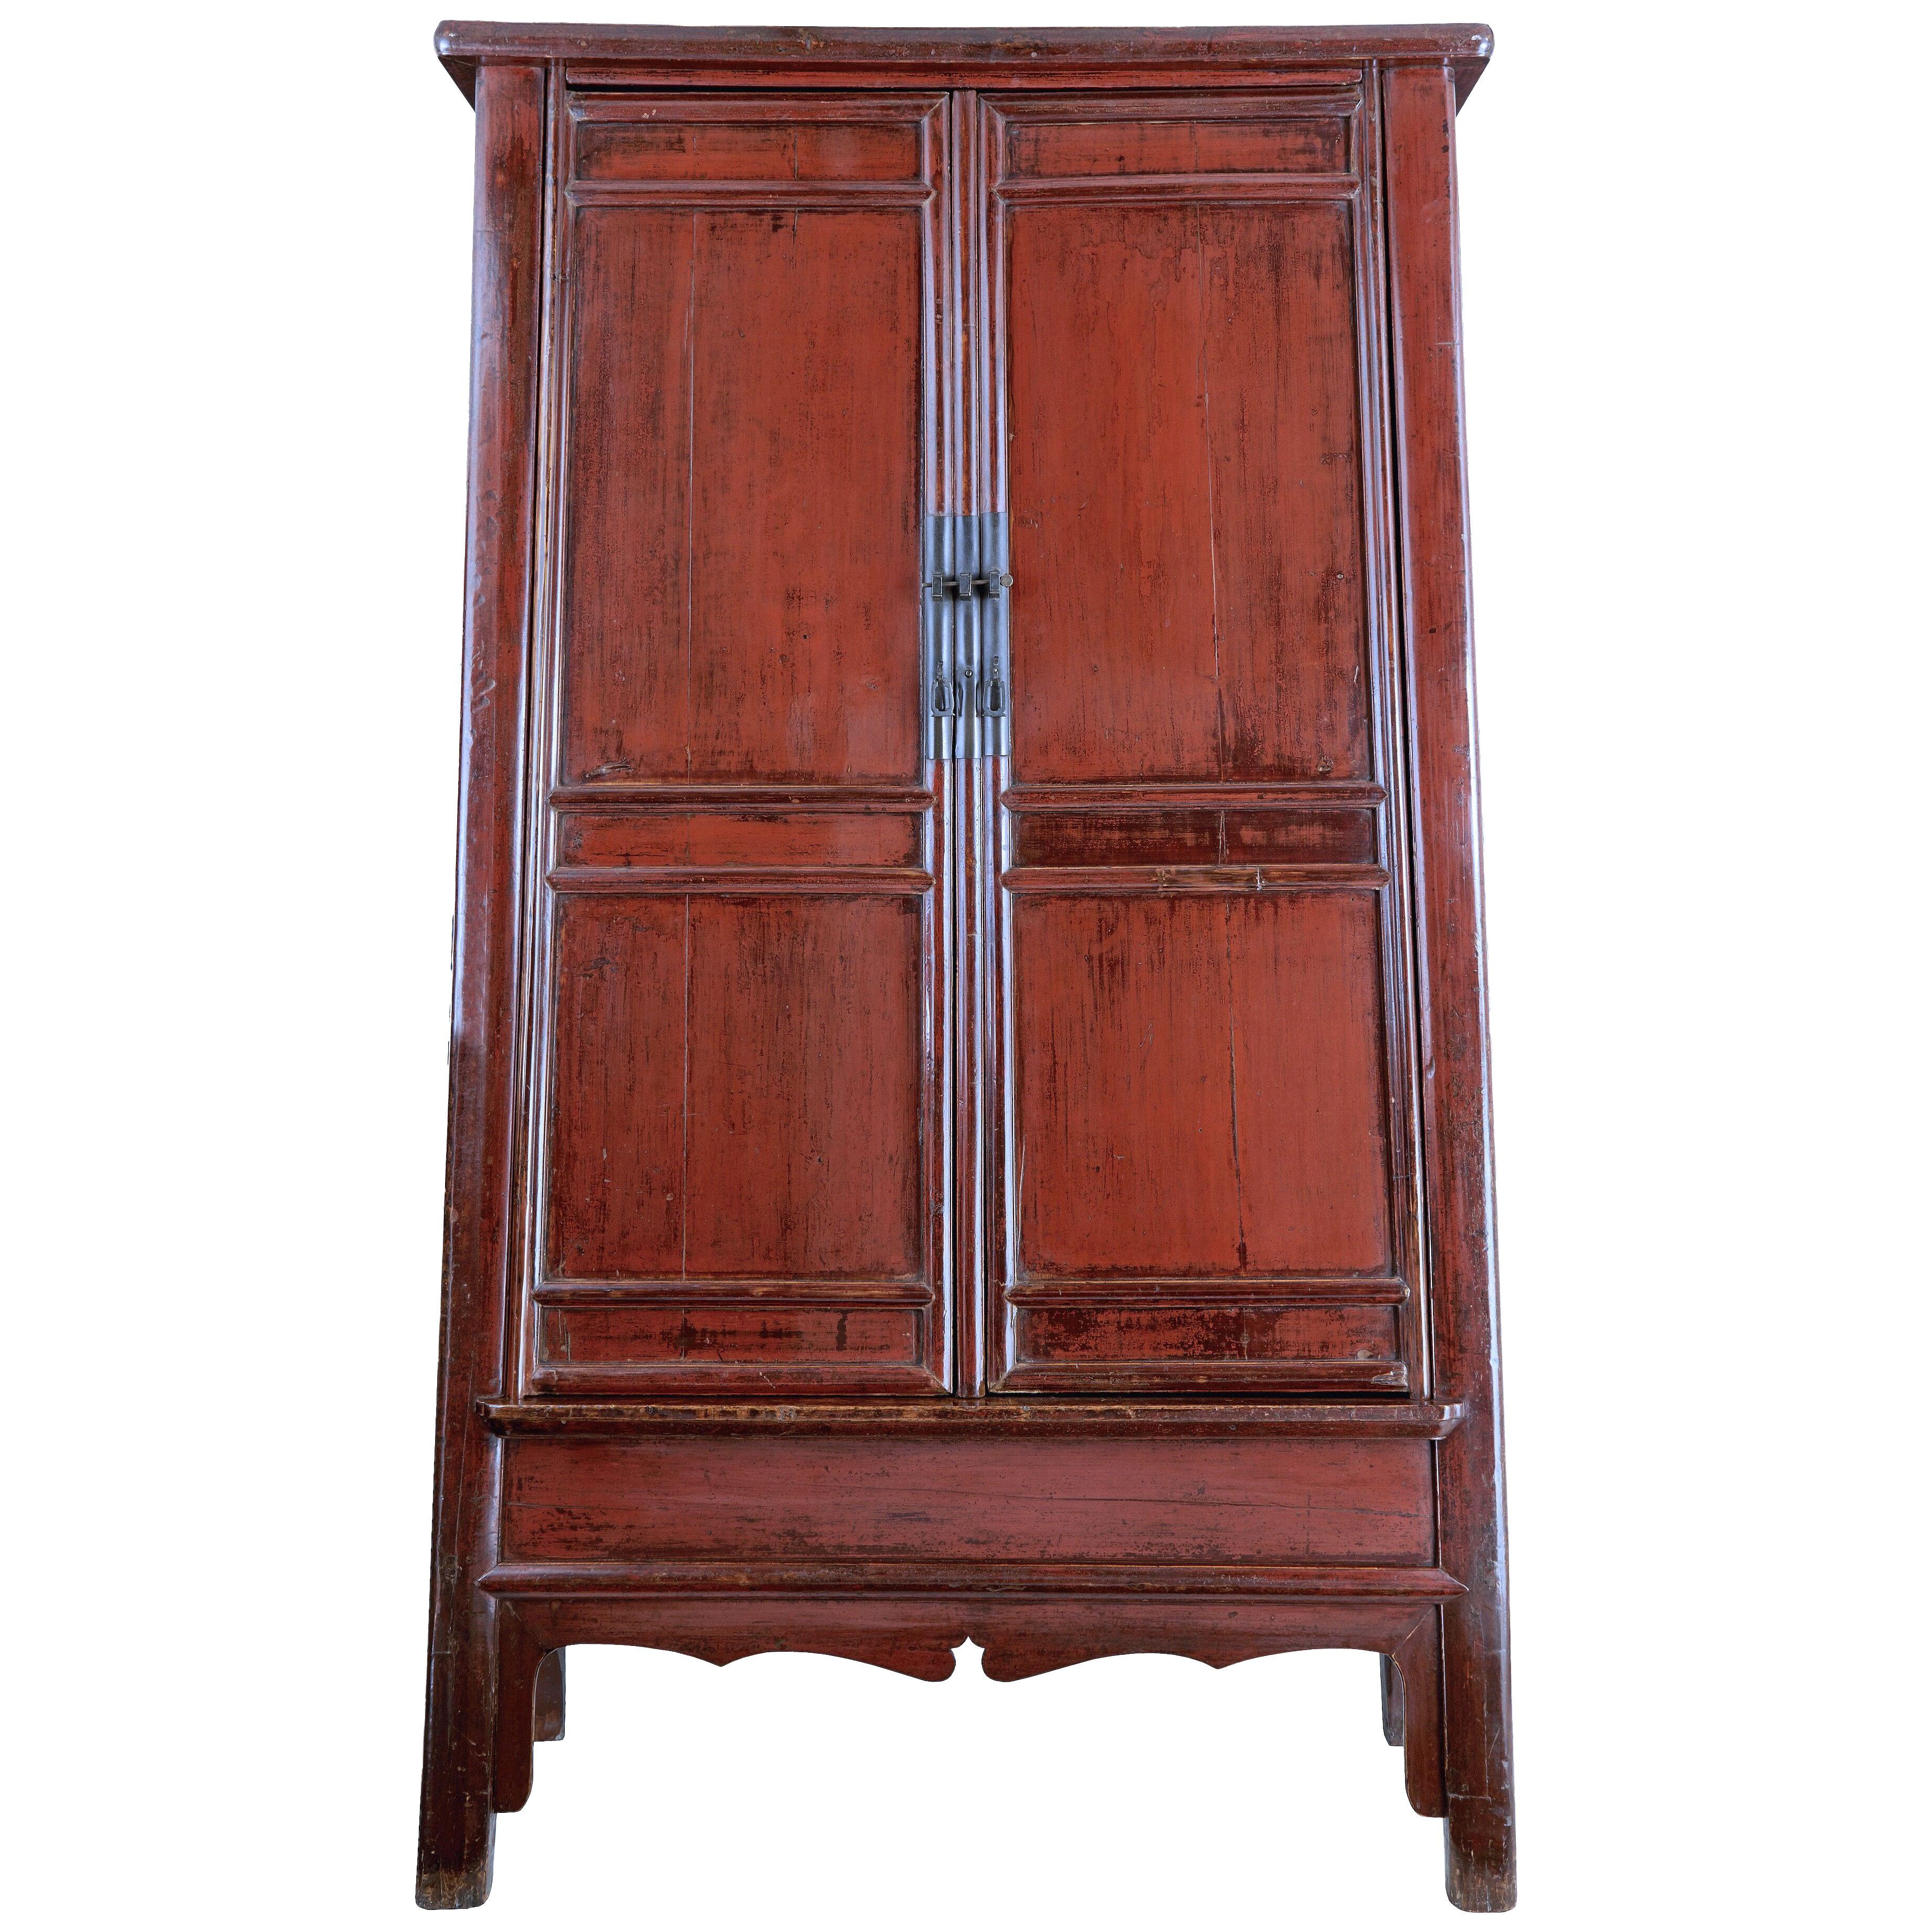 MONUMENTAL 19TH CENTURY CHINESE RED LACQUER CUPBOARD